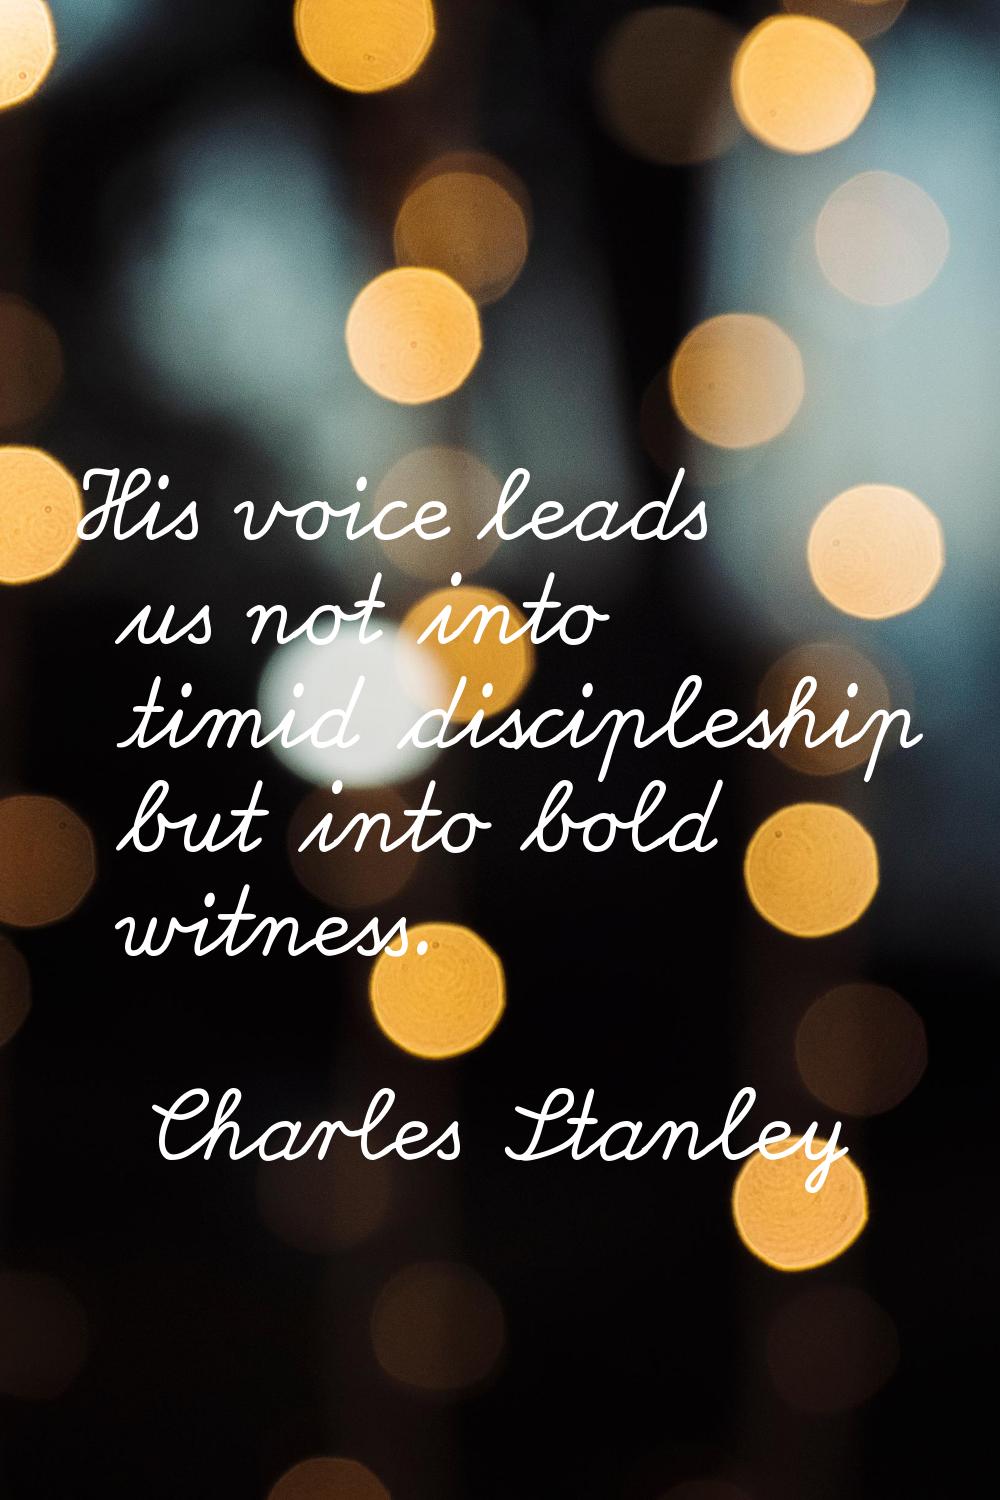 His voice leads us not into timid discipleship but into bold witness.